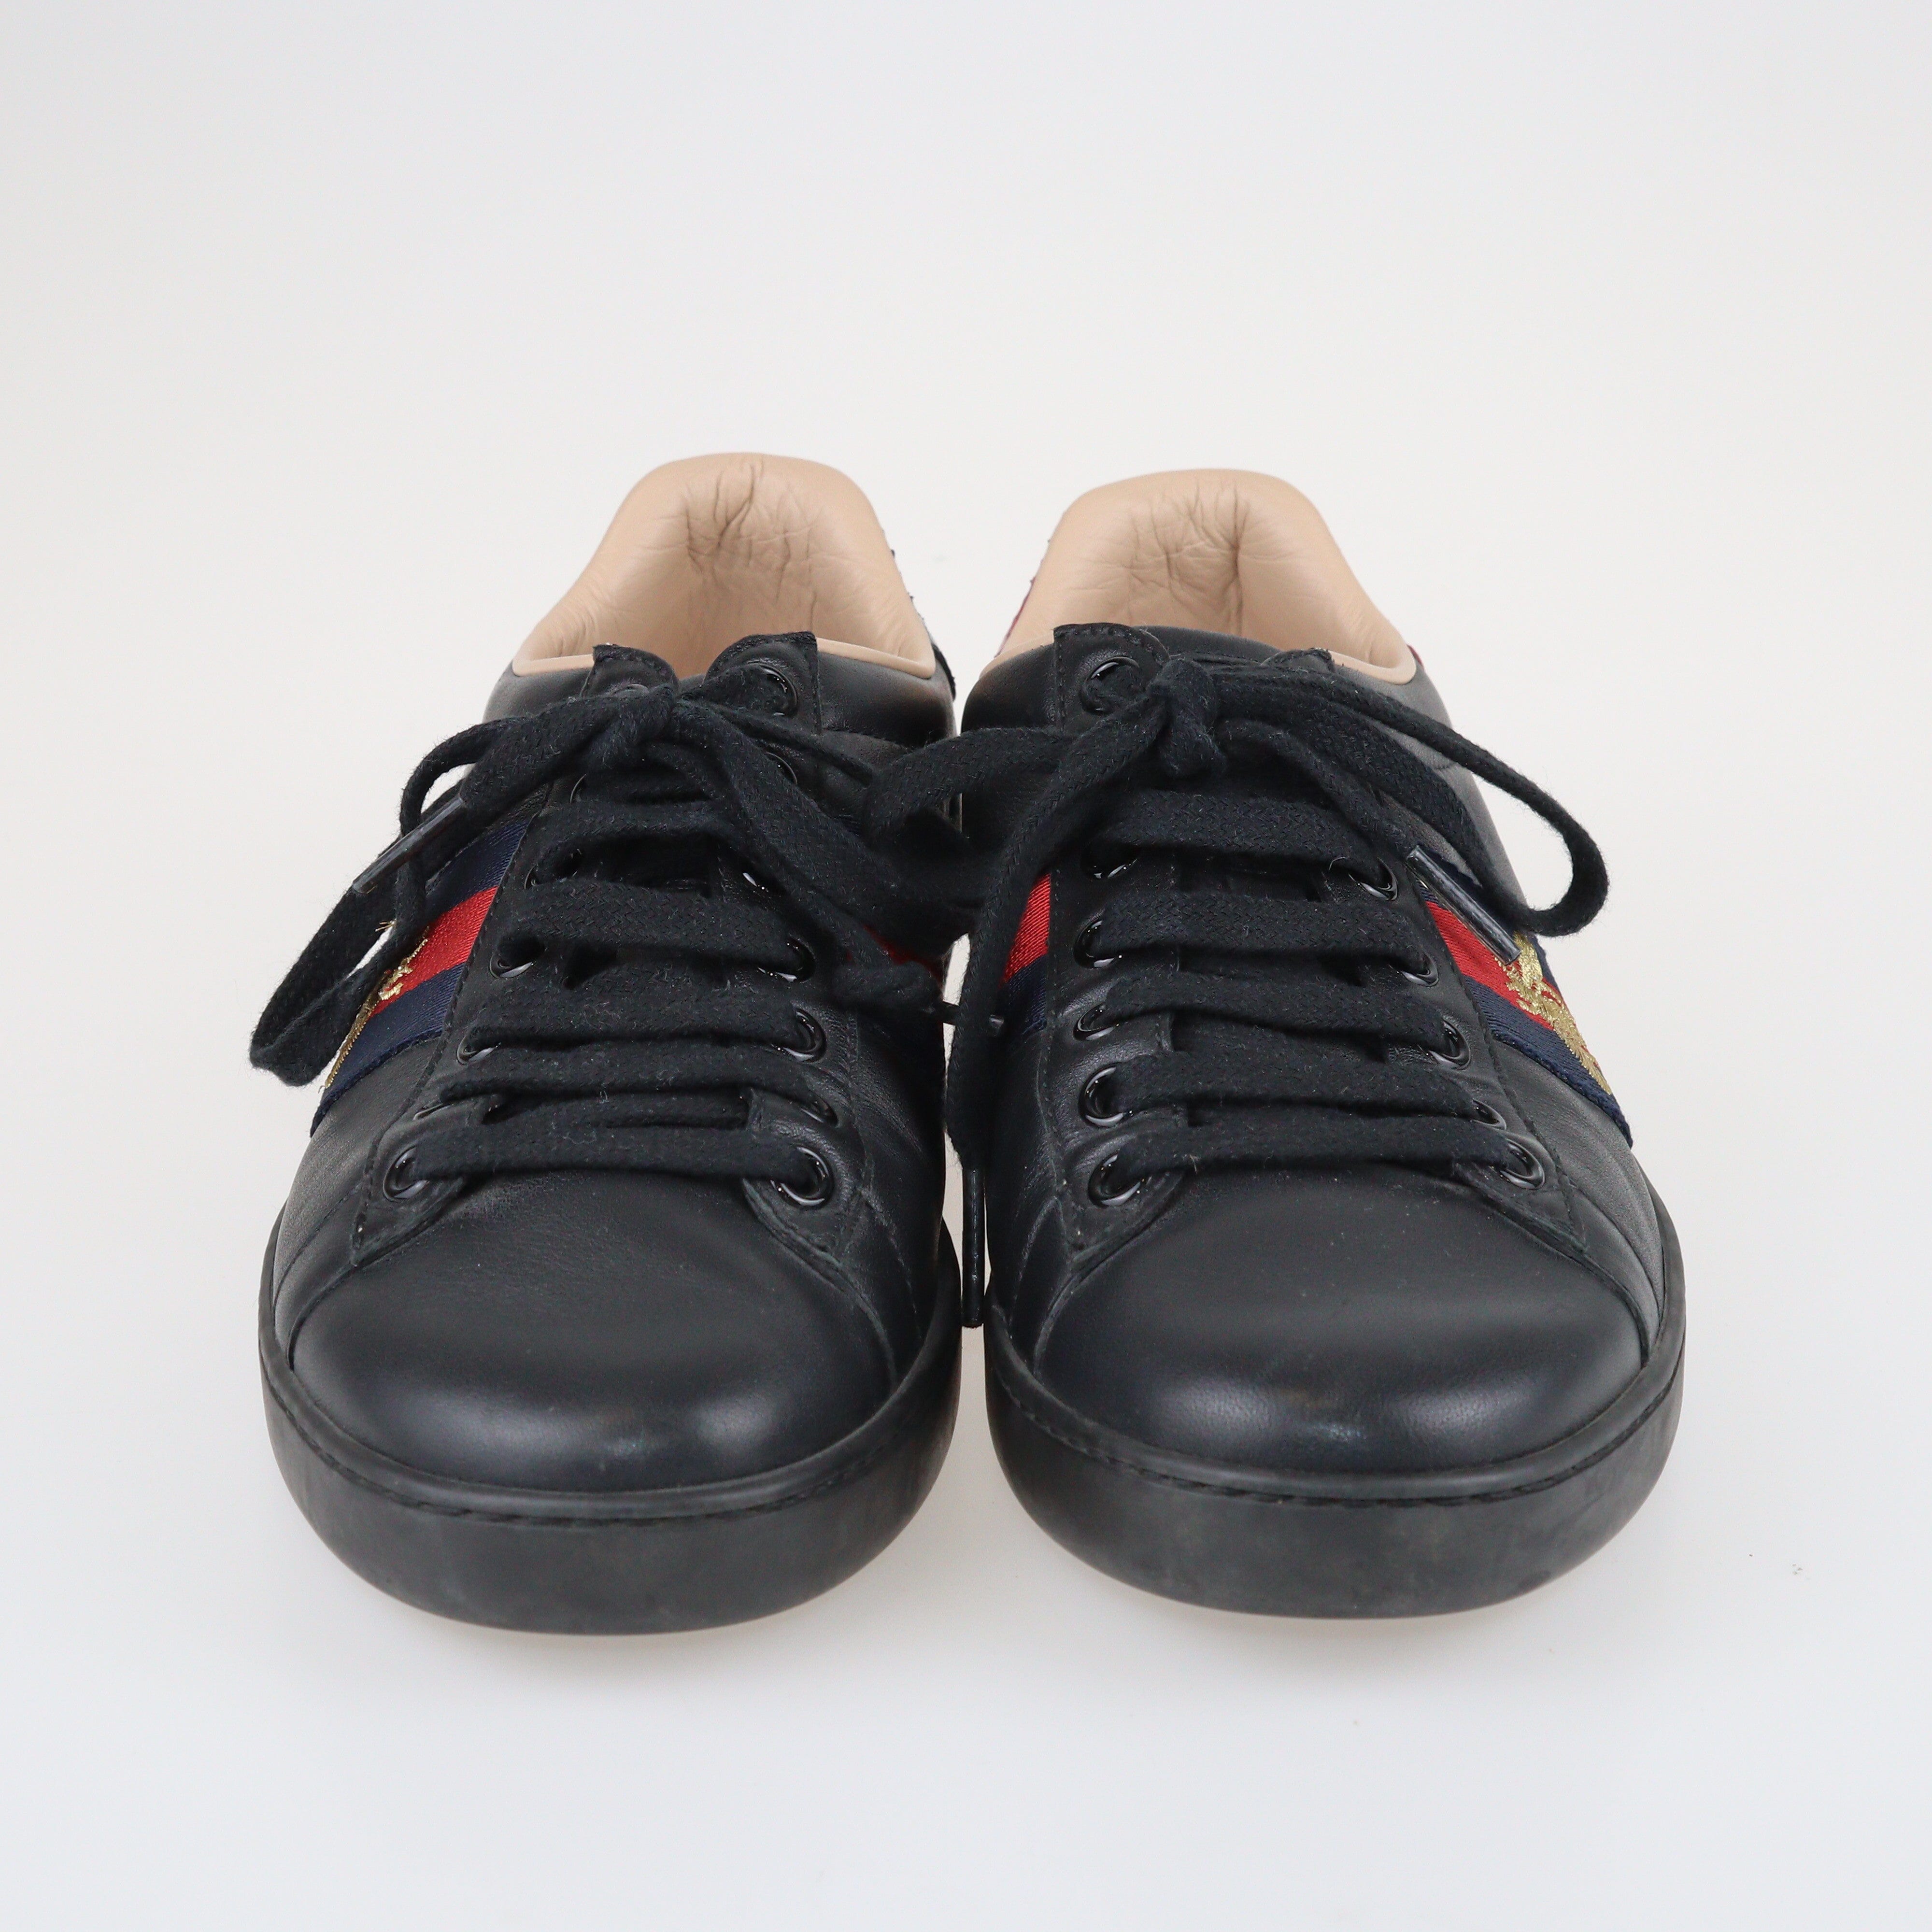 Black Ace Low Top Sneakers Shoes Gucci 